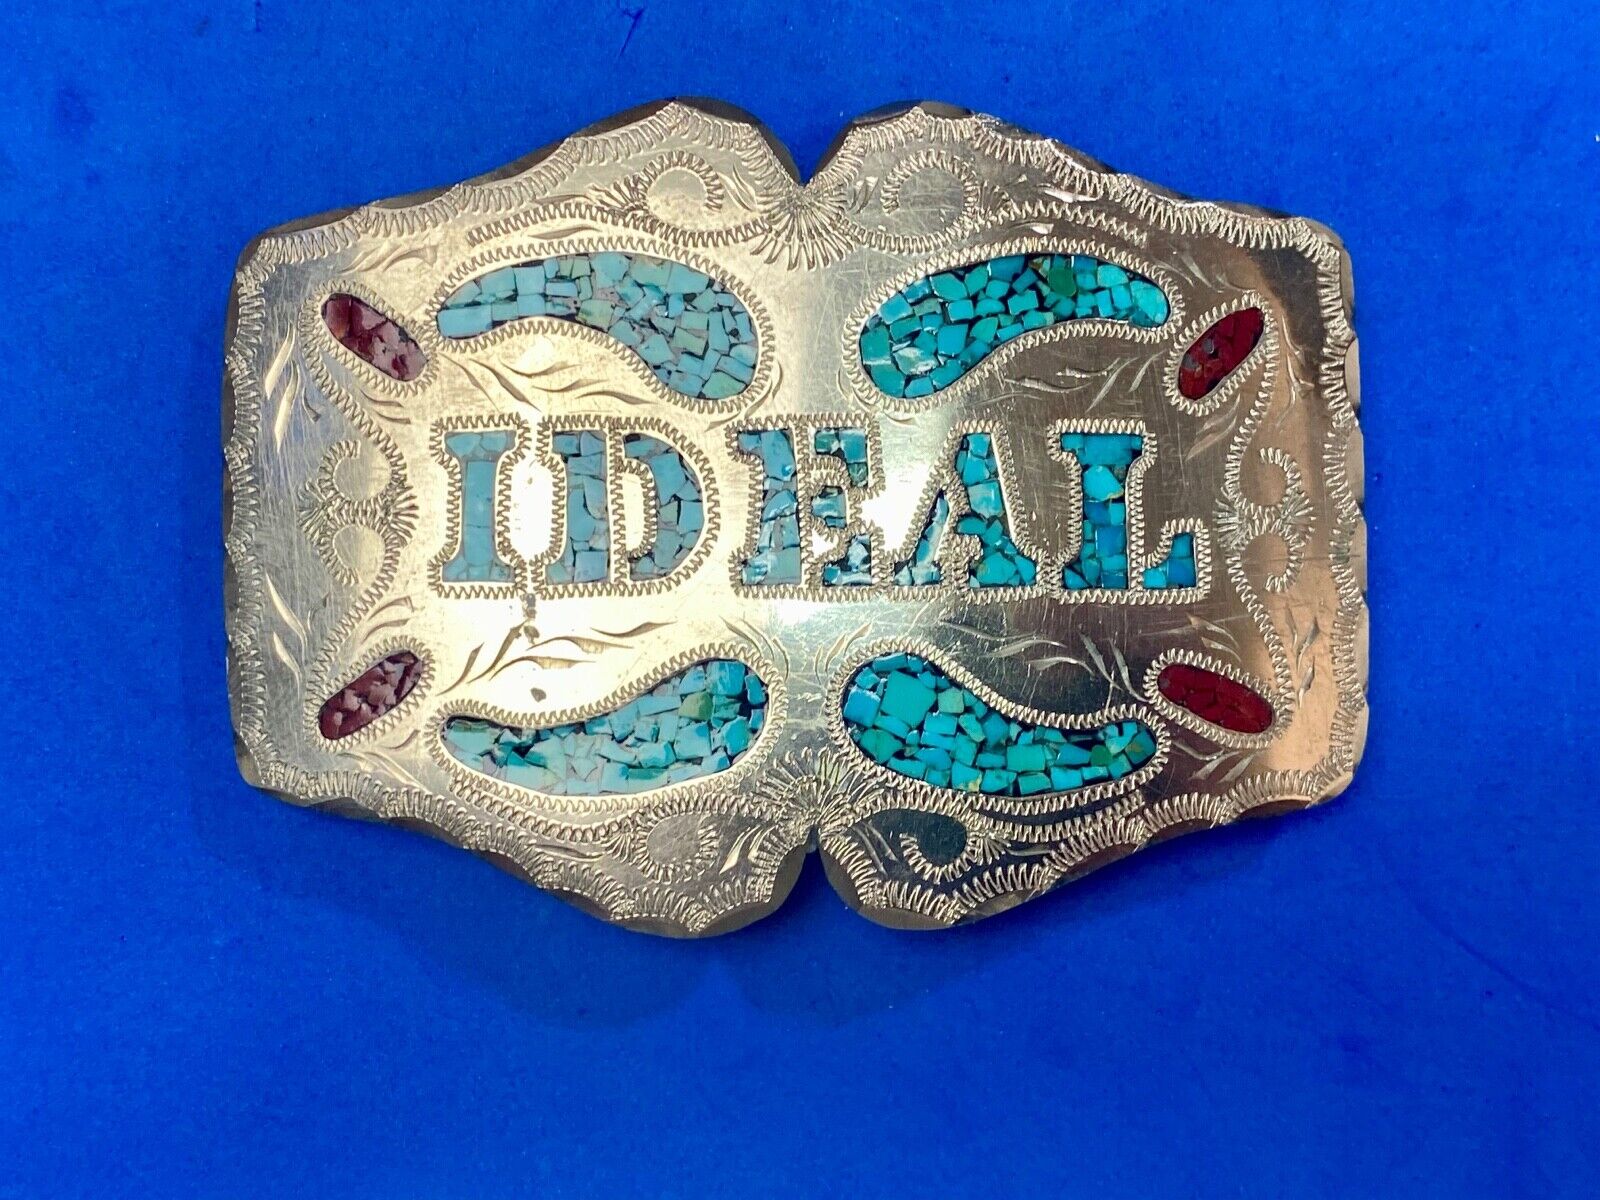 IDEAL  inlaid turquoise and coral large southwestern belt buckle signed Sanchez